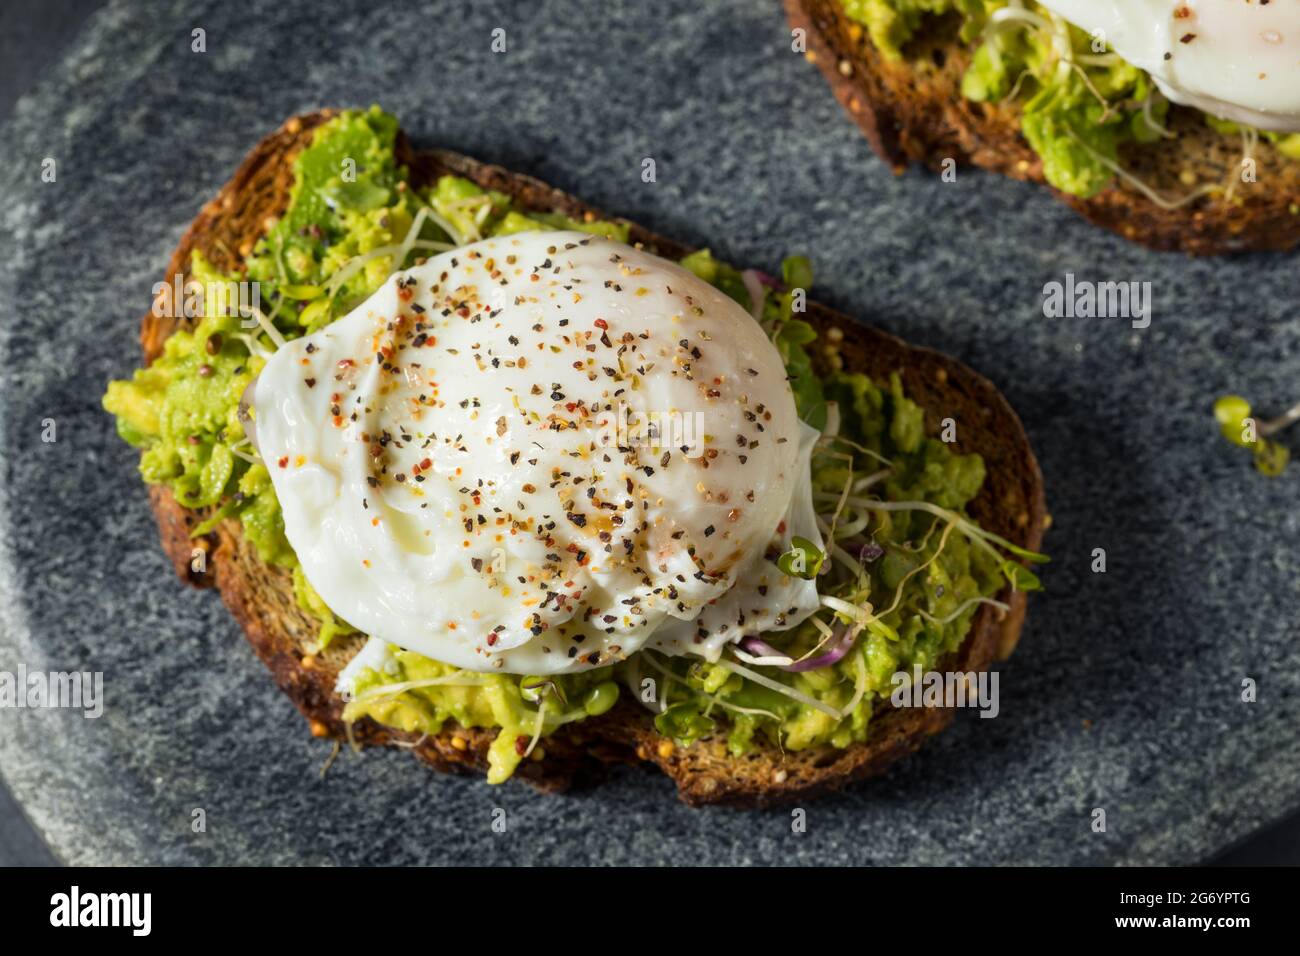 Homemade Healthy Avocado Toast with Poached Egg and Sprouts Stock Photo